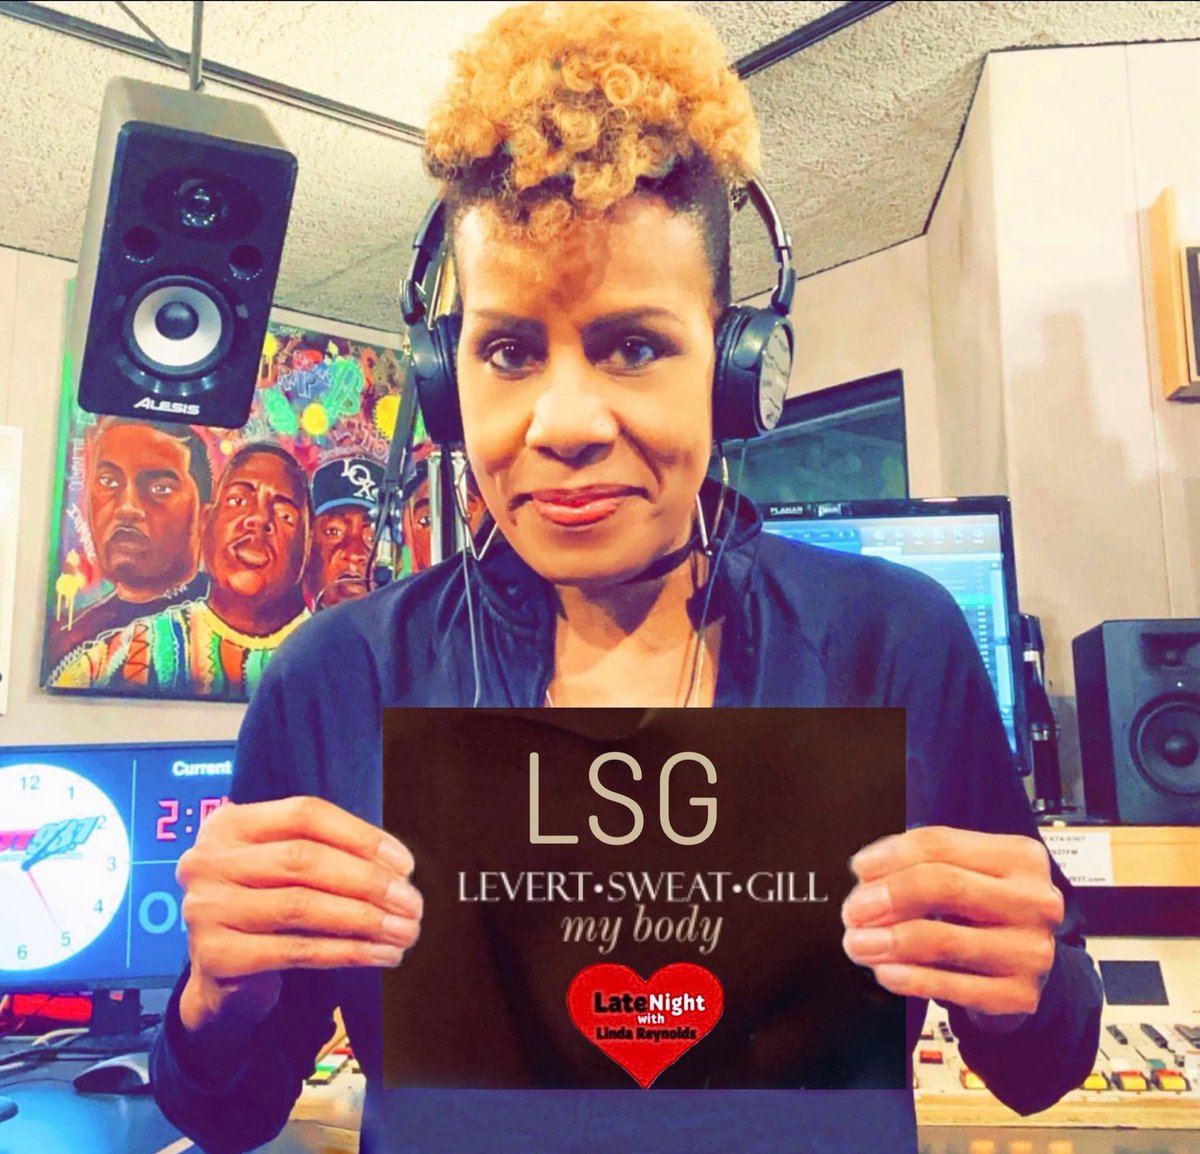 At 10 tonight @hot937 #LateNightLove begins with #LSG #MyBody released in 1997. For Shouts/Requests hot937.com - On Air, my page #LindaReynolds #ListenLive on the Audacy app.